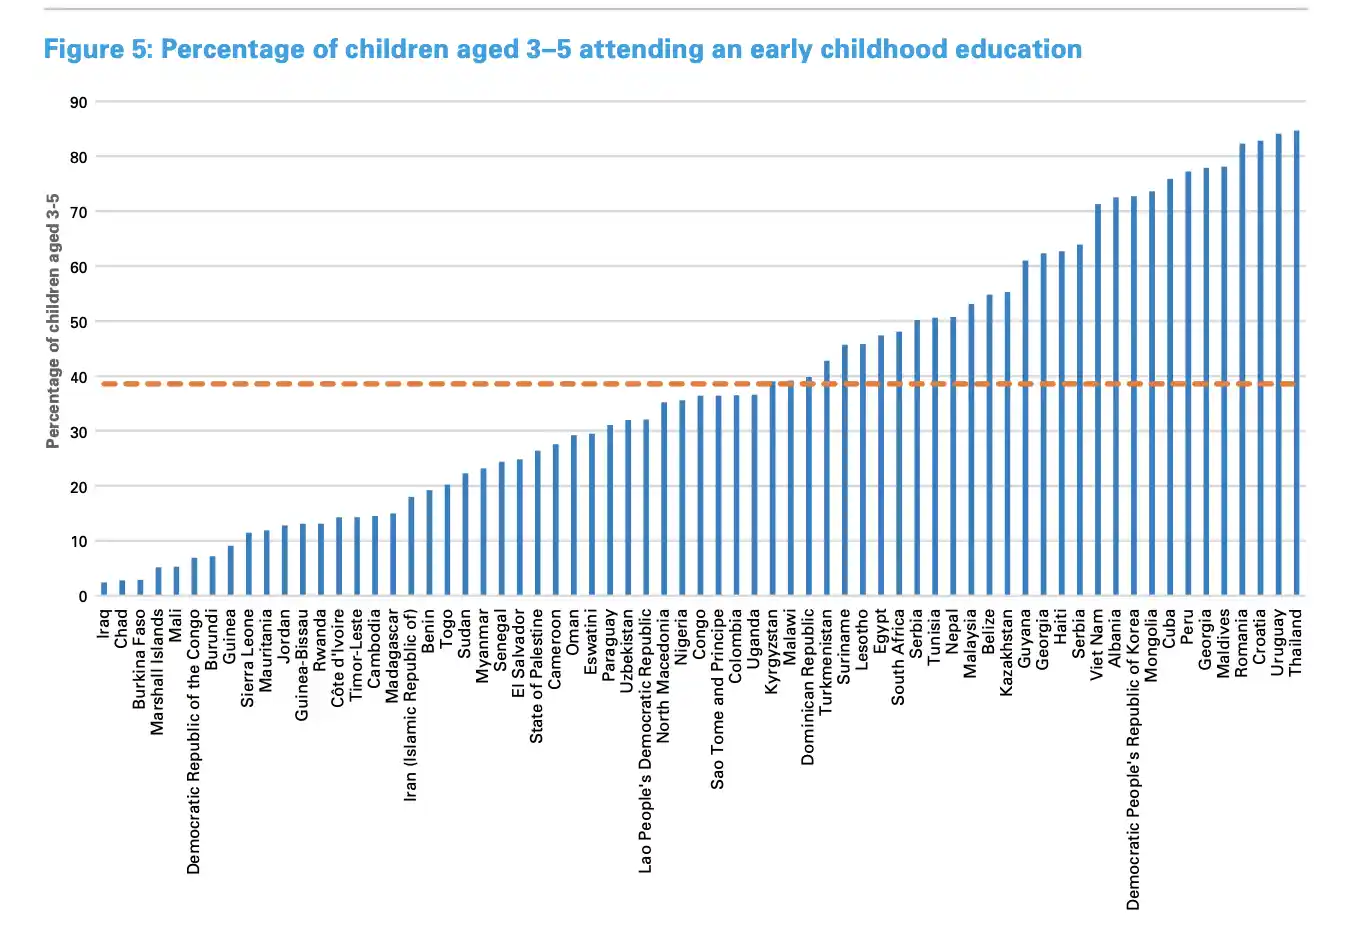 Figure 6 - Percentage of children aged 3-5 attending an early childhood education